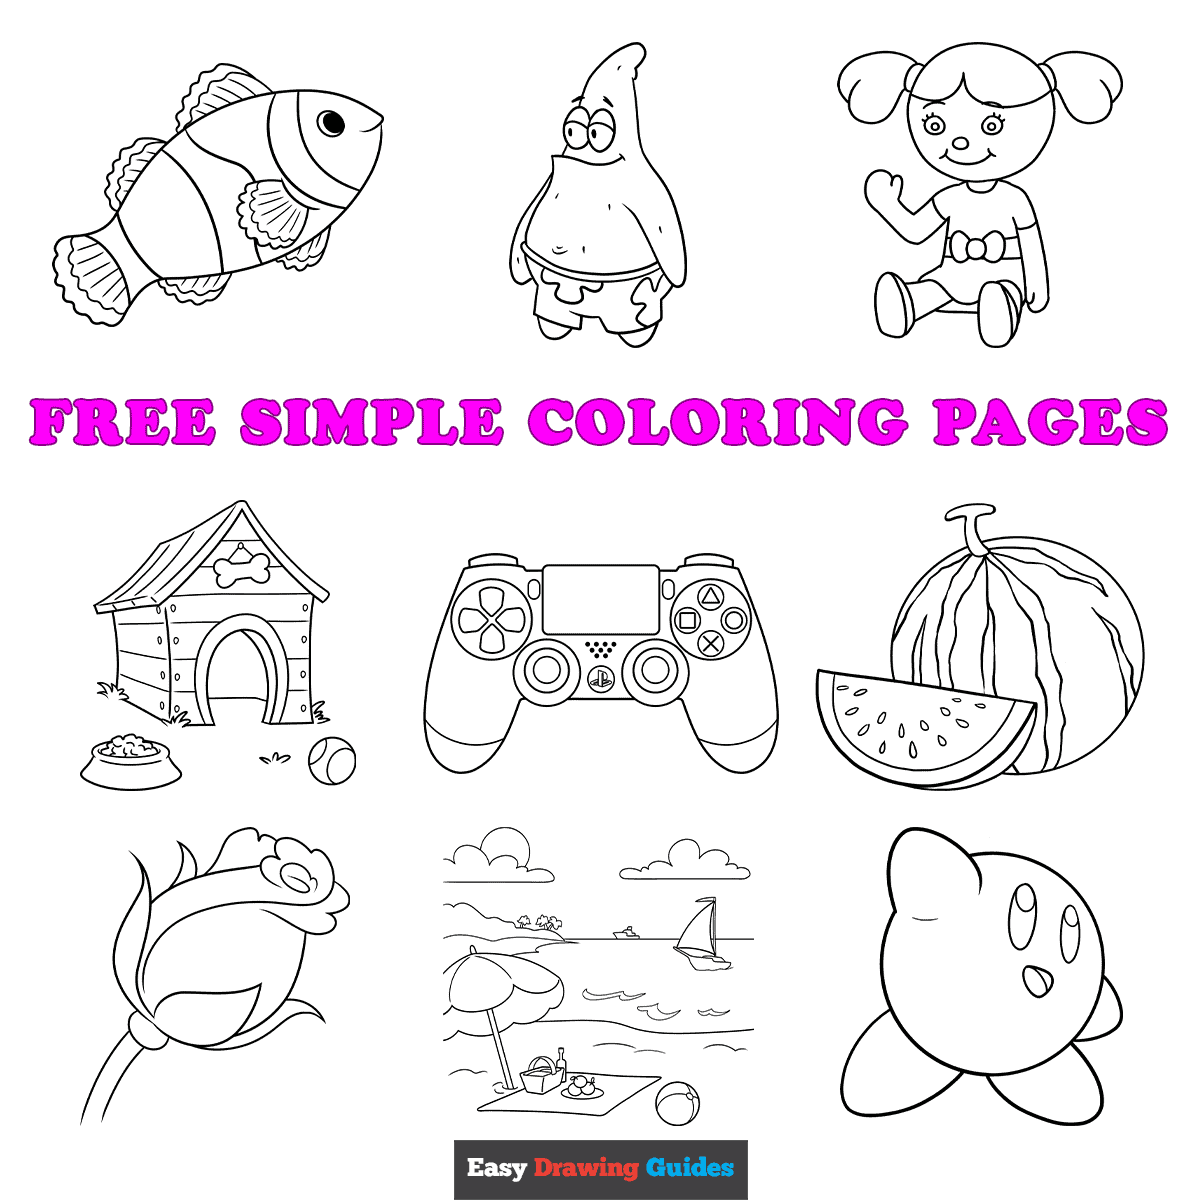 Free printable simple coloring pages for kids